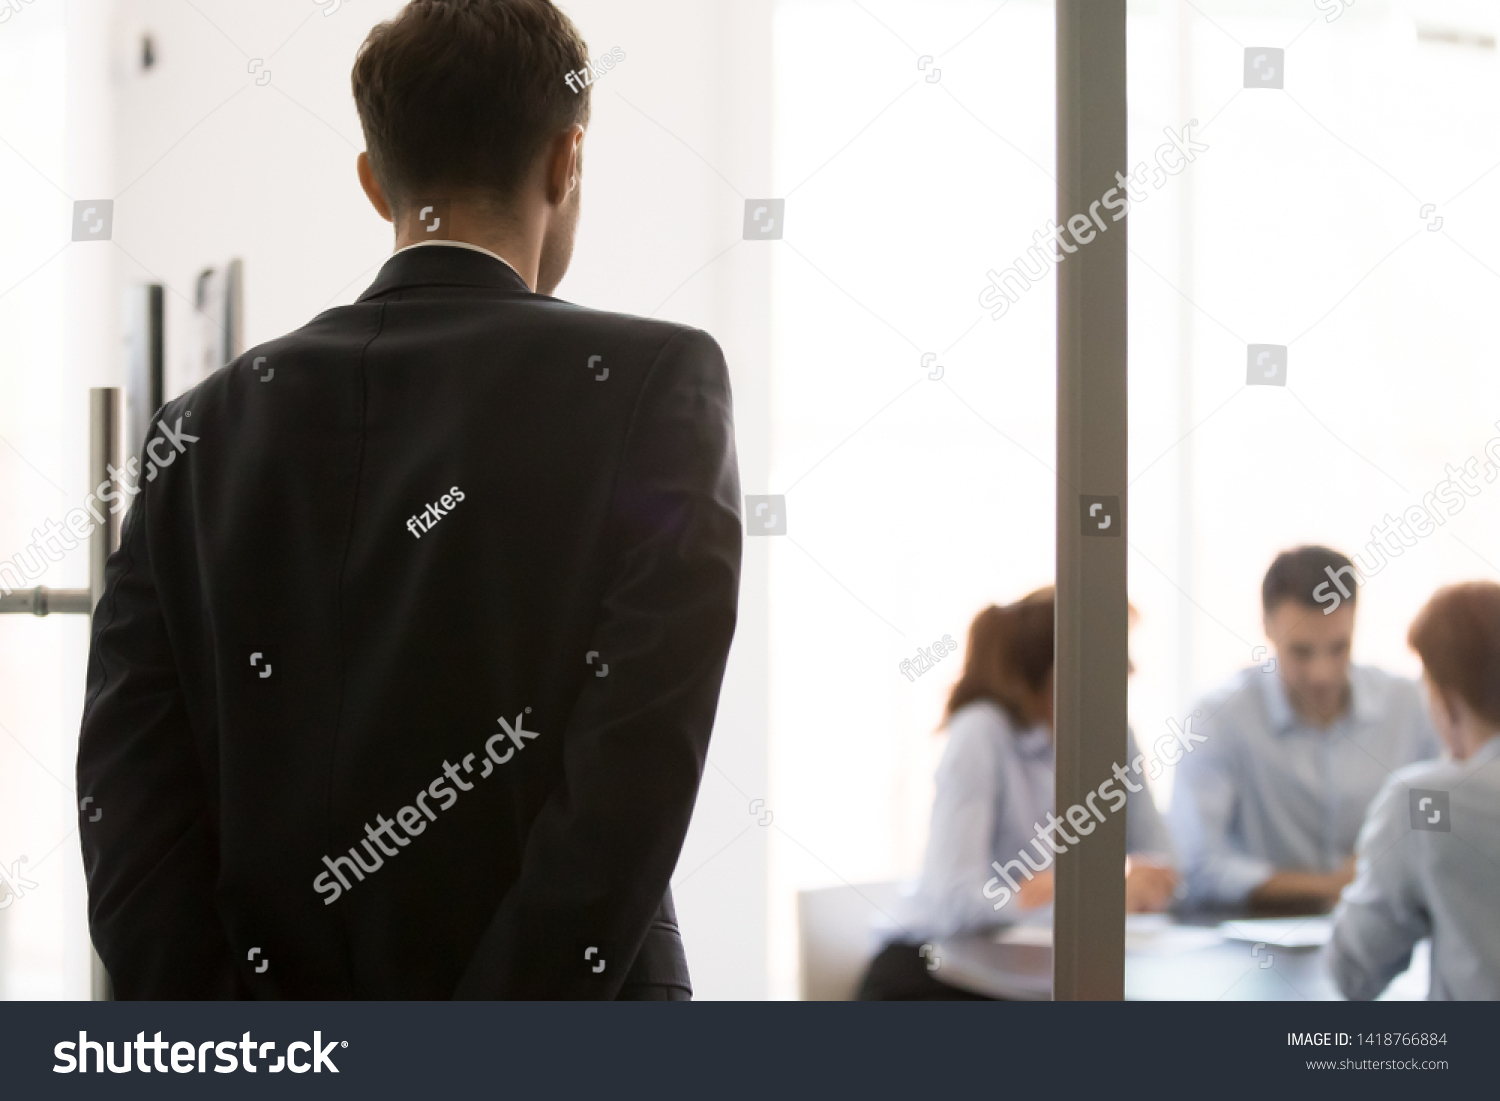 Rear view nervous man standing near glass door waiting looking at participants sitting at desk at business meeting. Lack self-confidence, public speaking fear, stressed applicant before job interview #1418766884